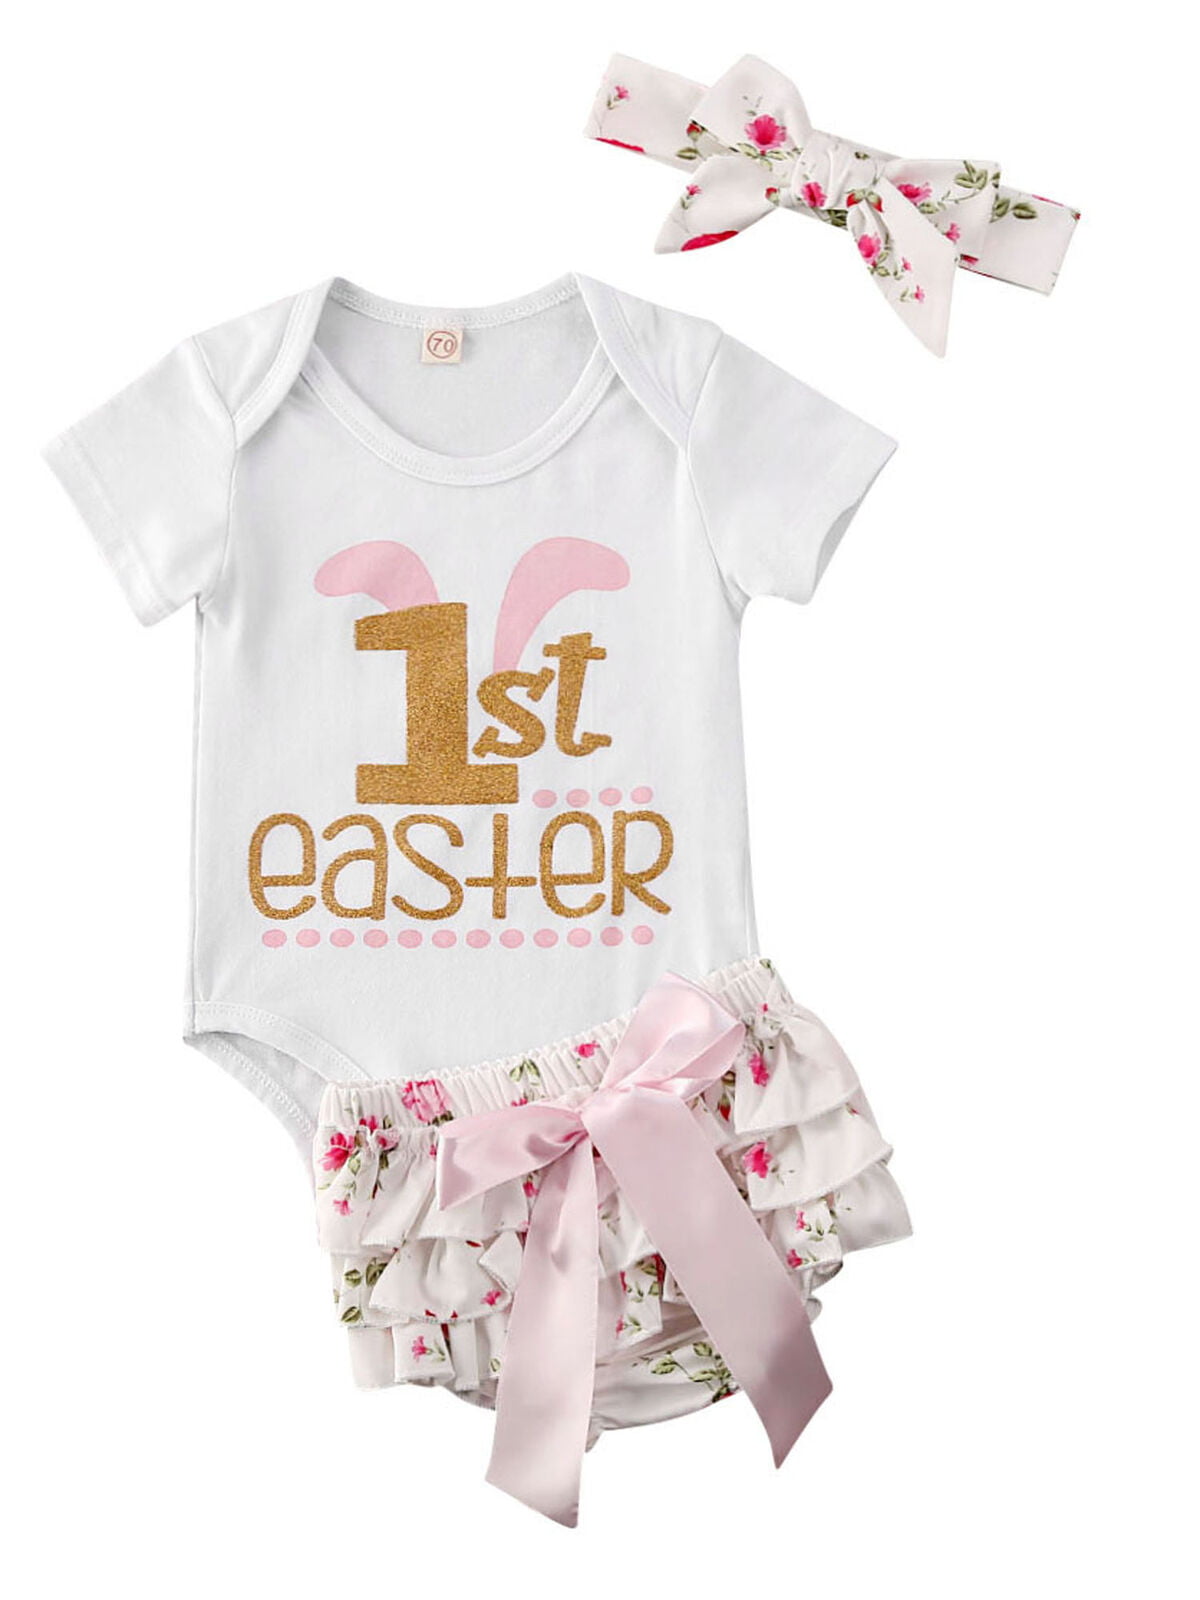 FYMNSI Newborn Baby Girl 1st Easter Outfit Infant Toddler Kids My First Easter Party Costume Princess Tutu Romper Dress Bunny Egg Print Short Sleeve Bodysuit Headband Shoes 3pcs Clothes Set Photo Prop 